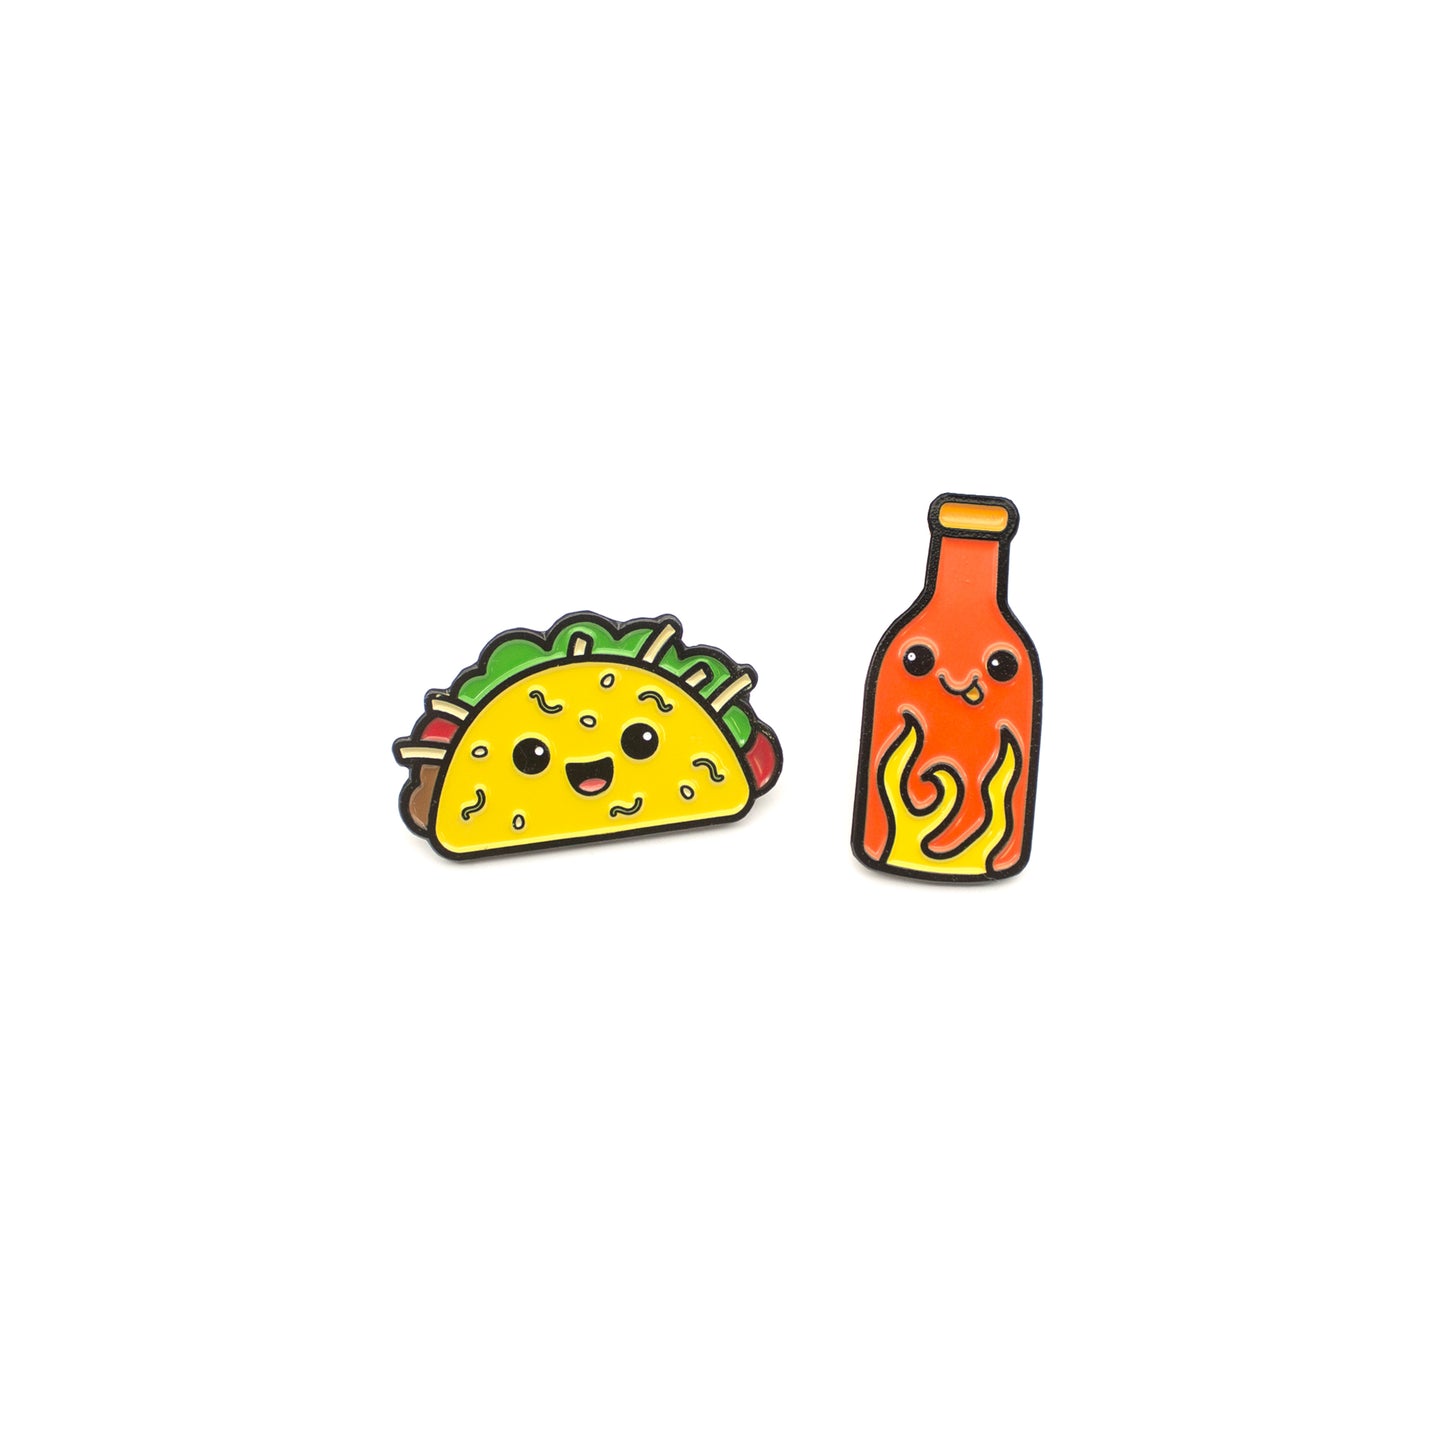 Taco and Hot Sauce enamel pins on white background